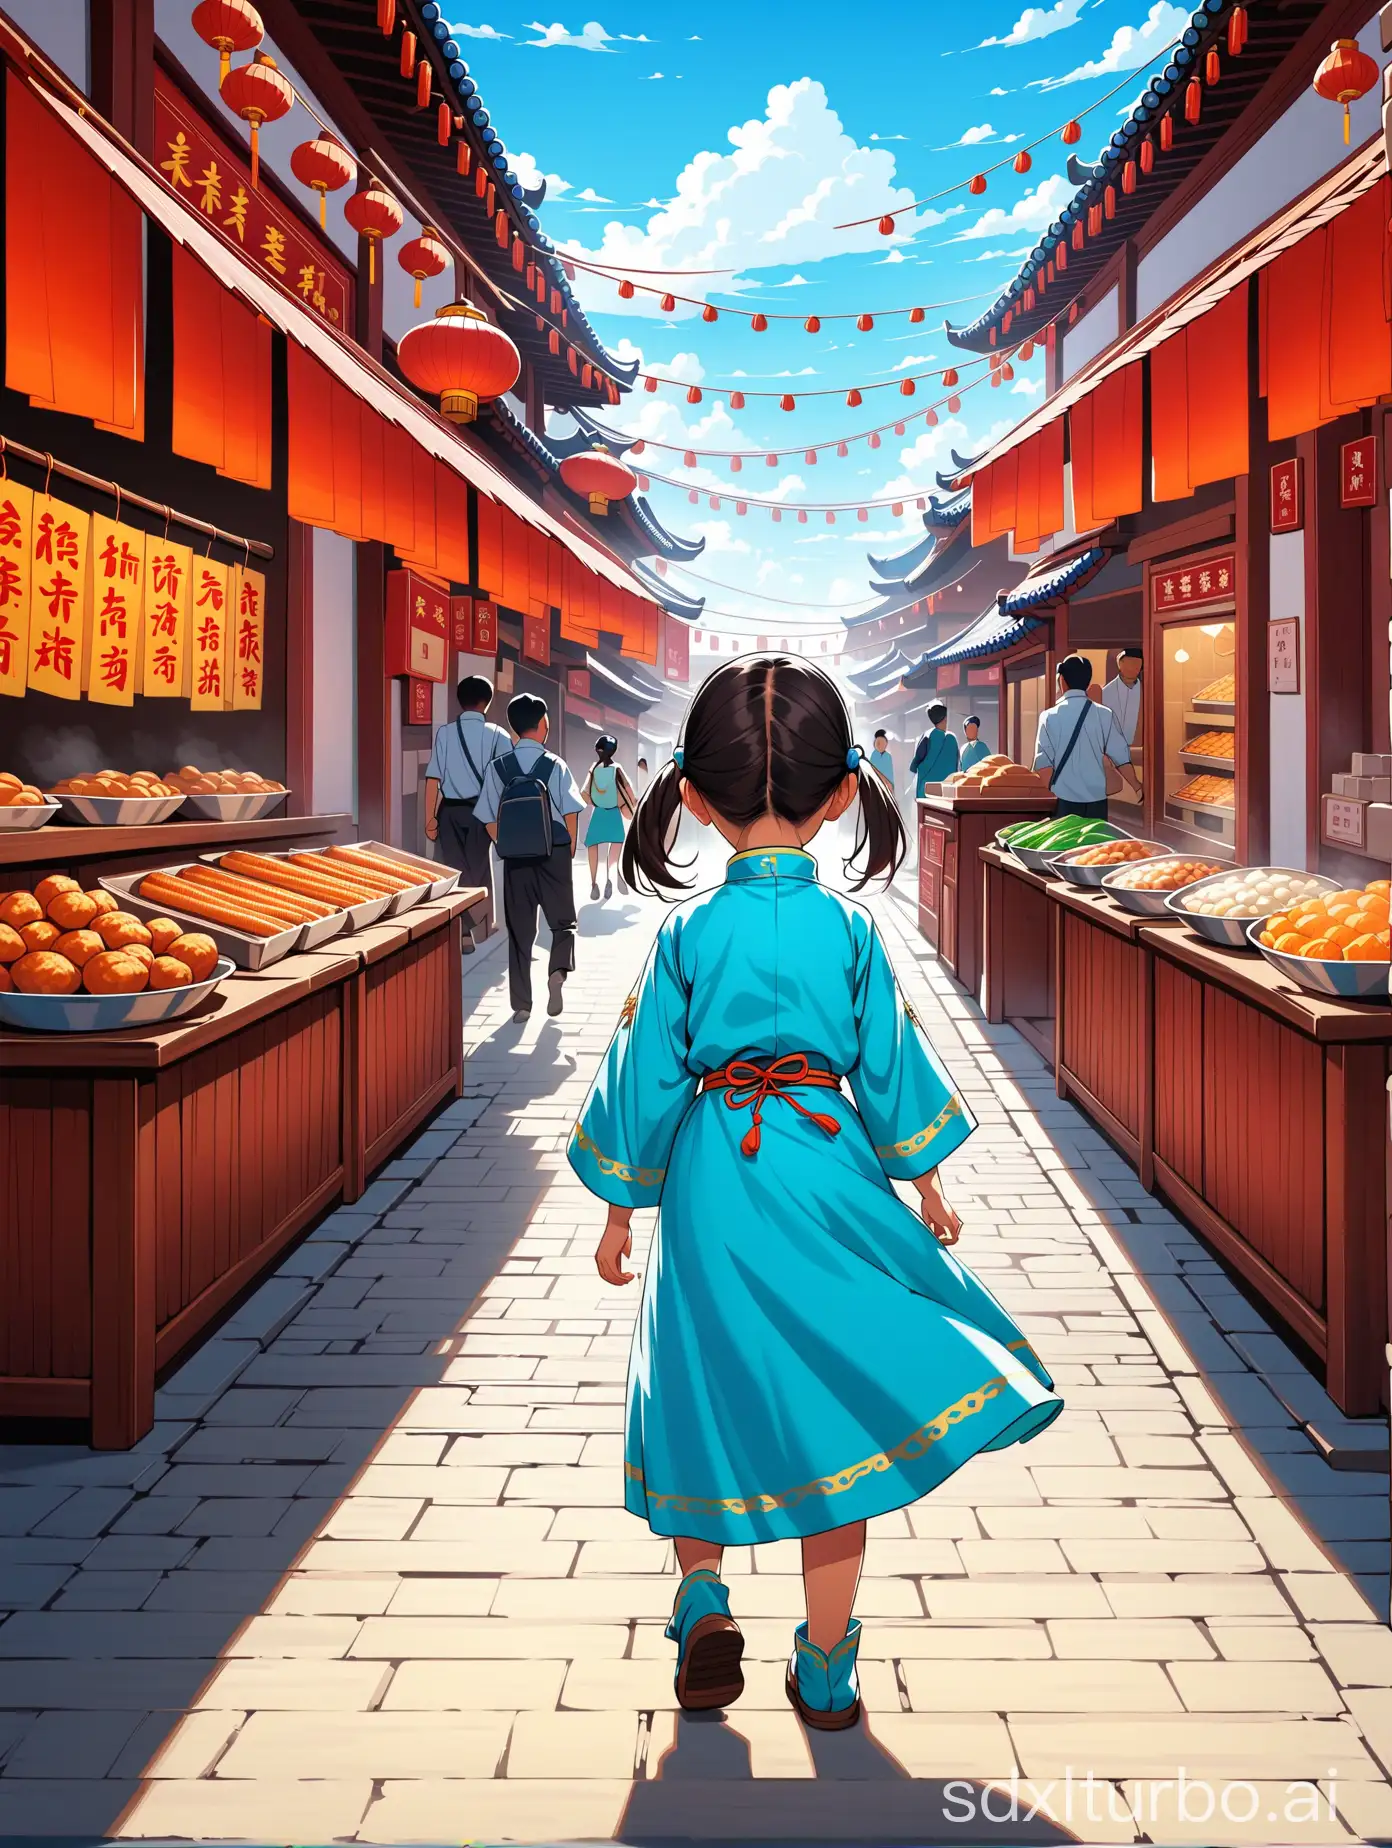 A little girl walking in a lively Chinese street where people are buying Chinese food and she feels new and awesome. I can see the girl from behind. The girl wears a blue Mongolian traditional outfit as bright as the sky.